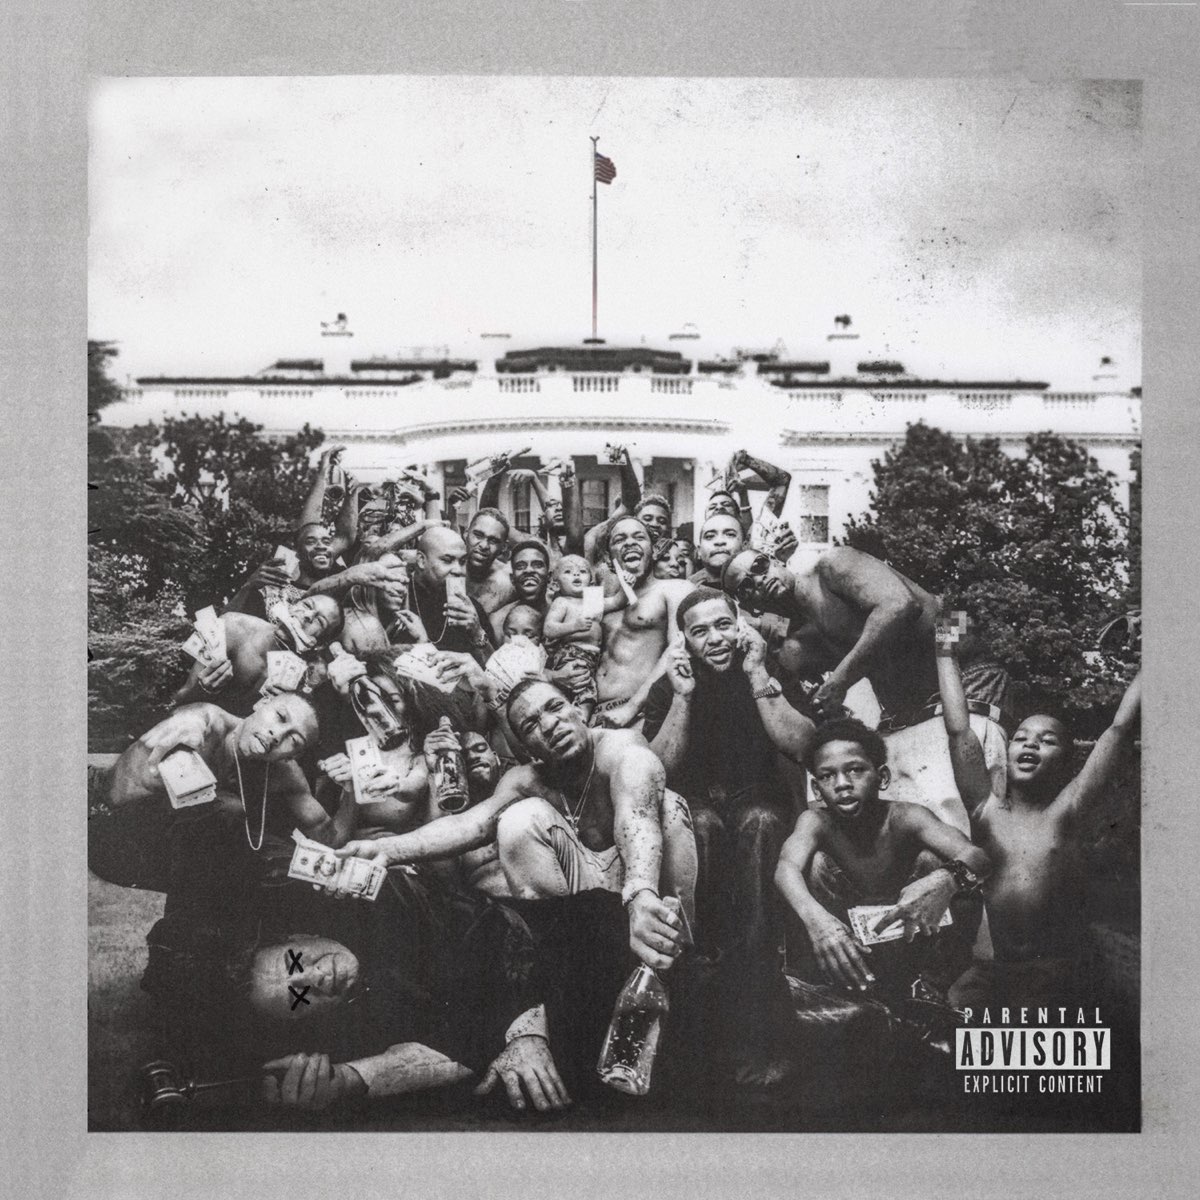 "To Pimp a Butterfly" by Kendrick Lamar album cover